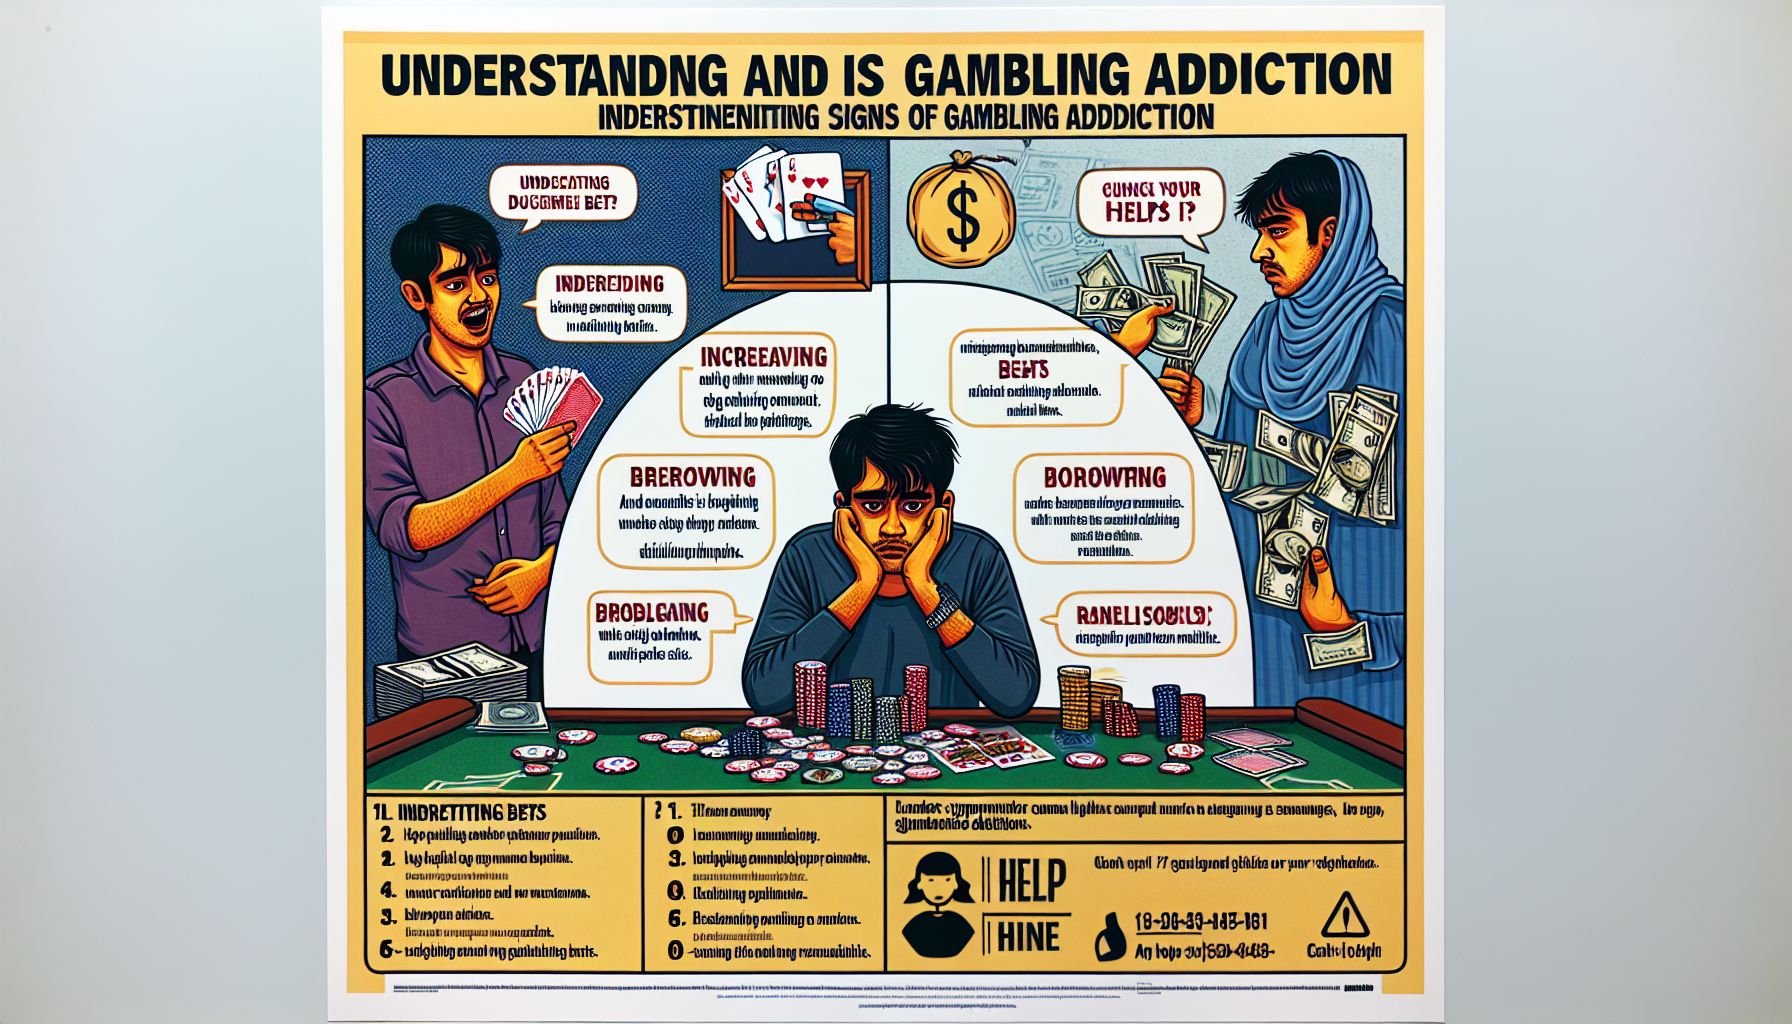 Gambling Addiction: Recognizing the Signs and Seeking Help